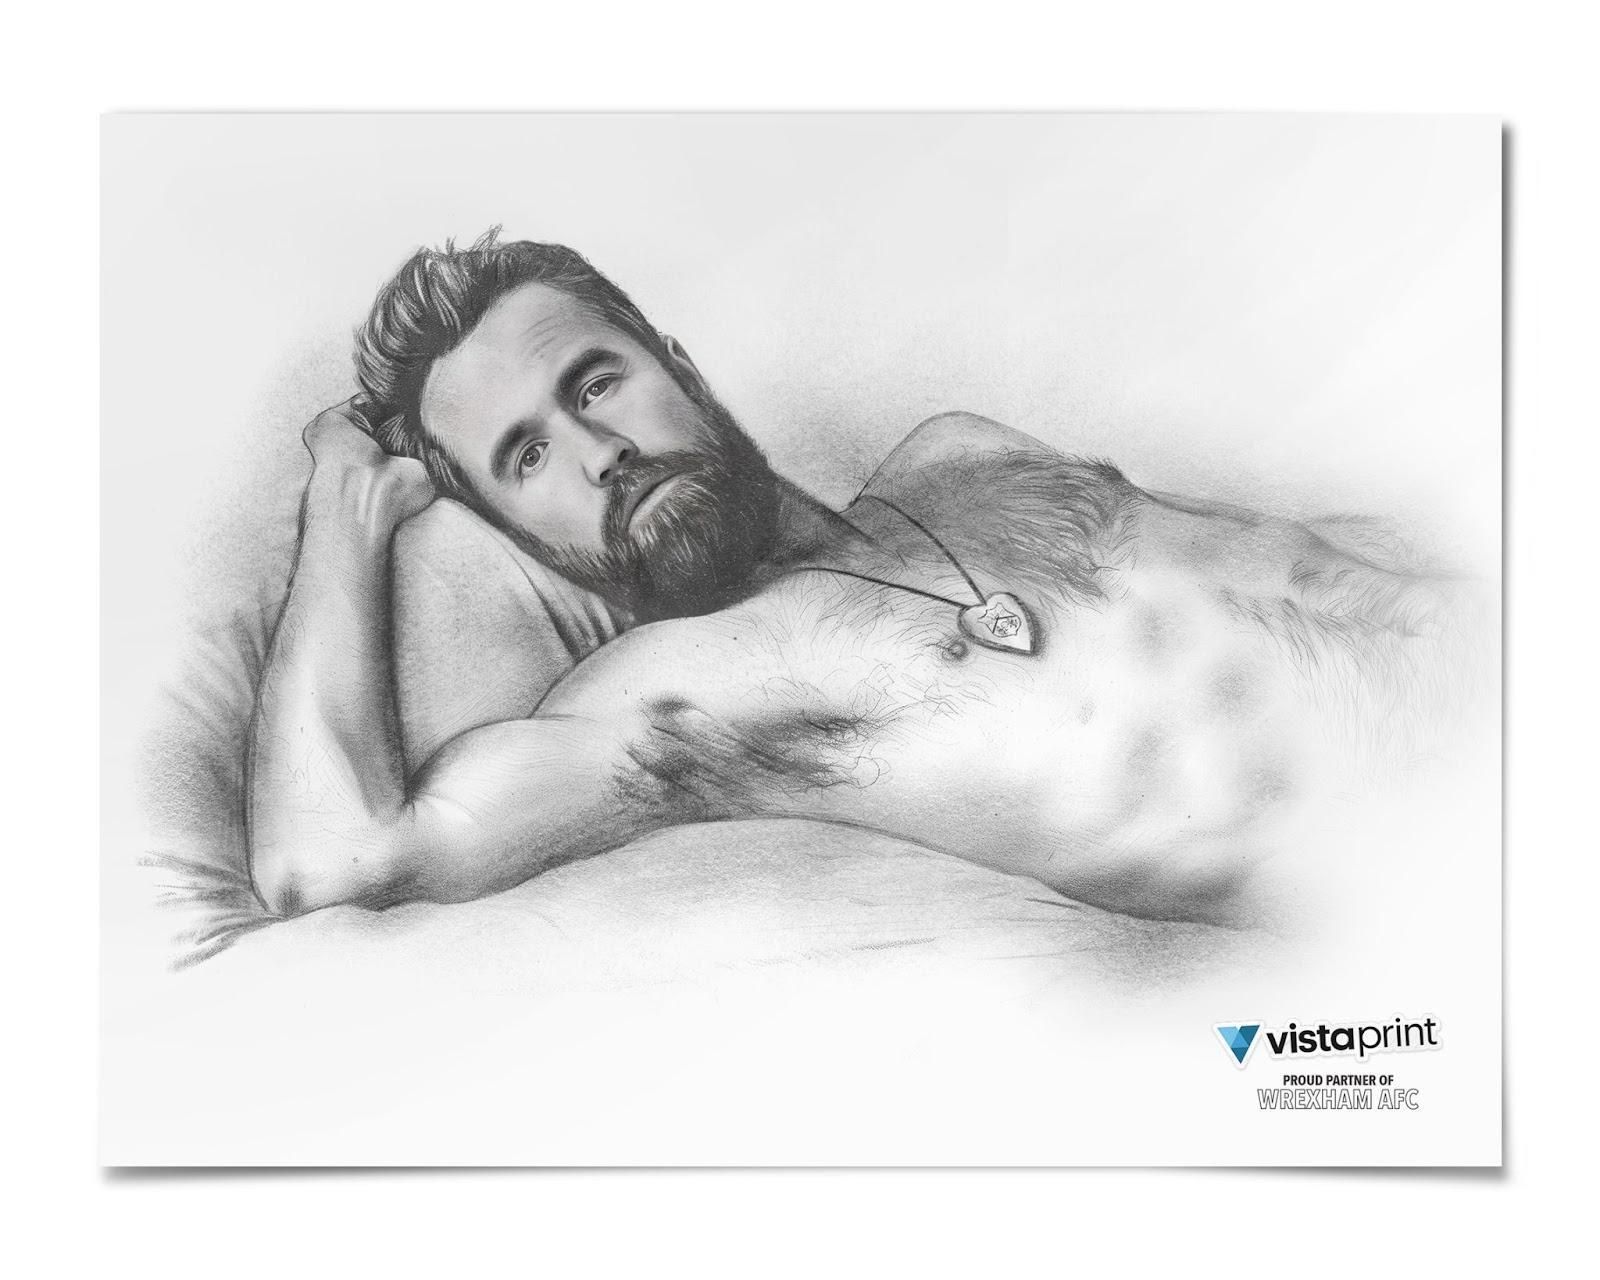 rob-mcelhenney-sketched-shrtless-like-rose-from-titanic-for-his-birthday